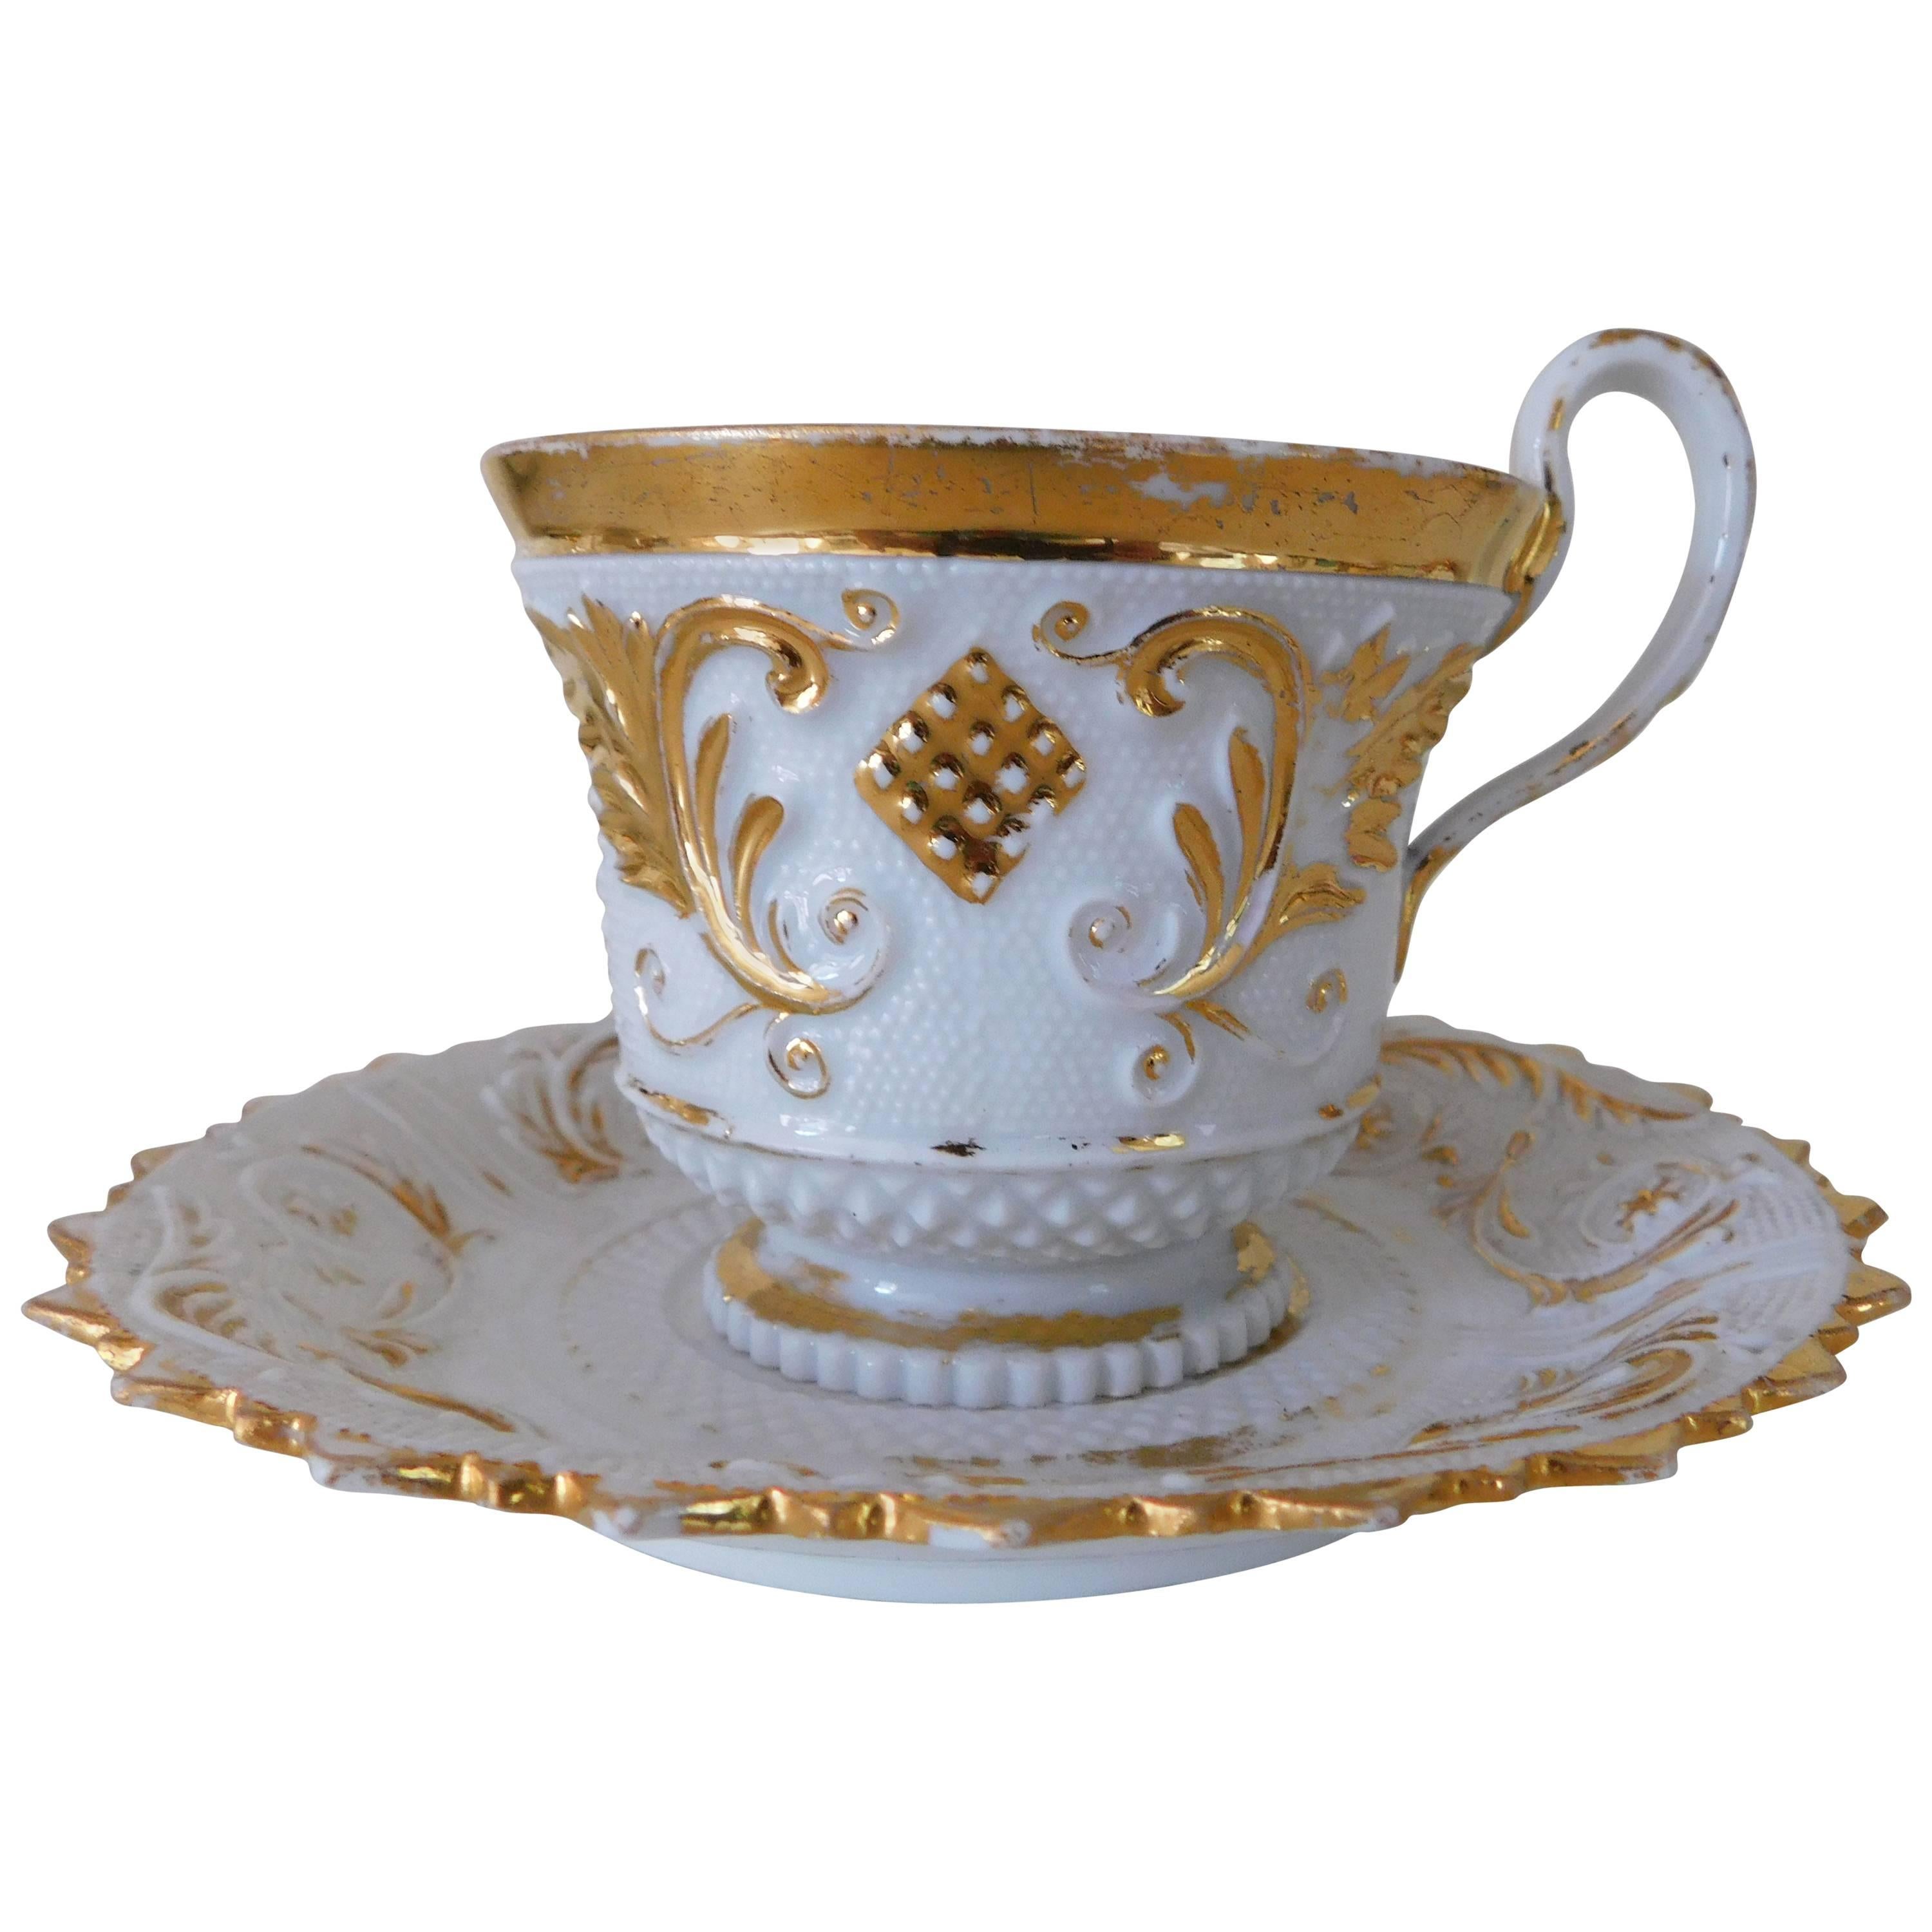 Early 19th Century Meissen Porcelain Cup and Saucer